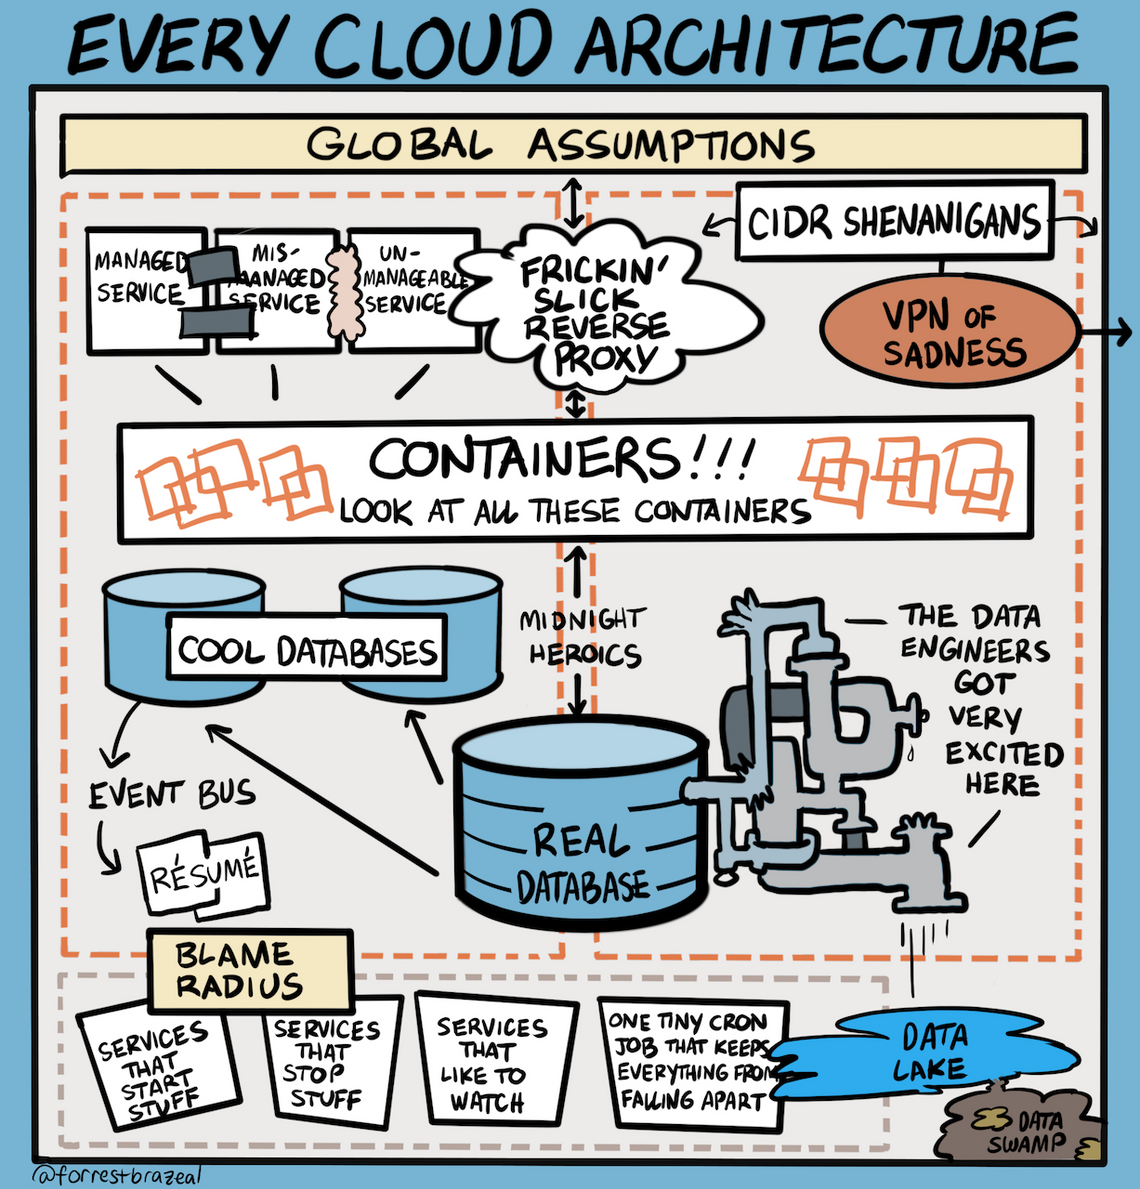 Every Cloud Architecture